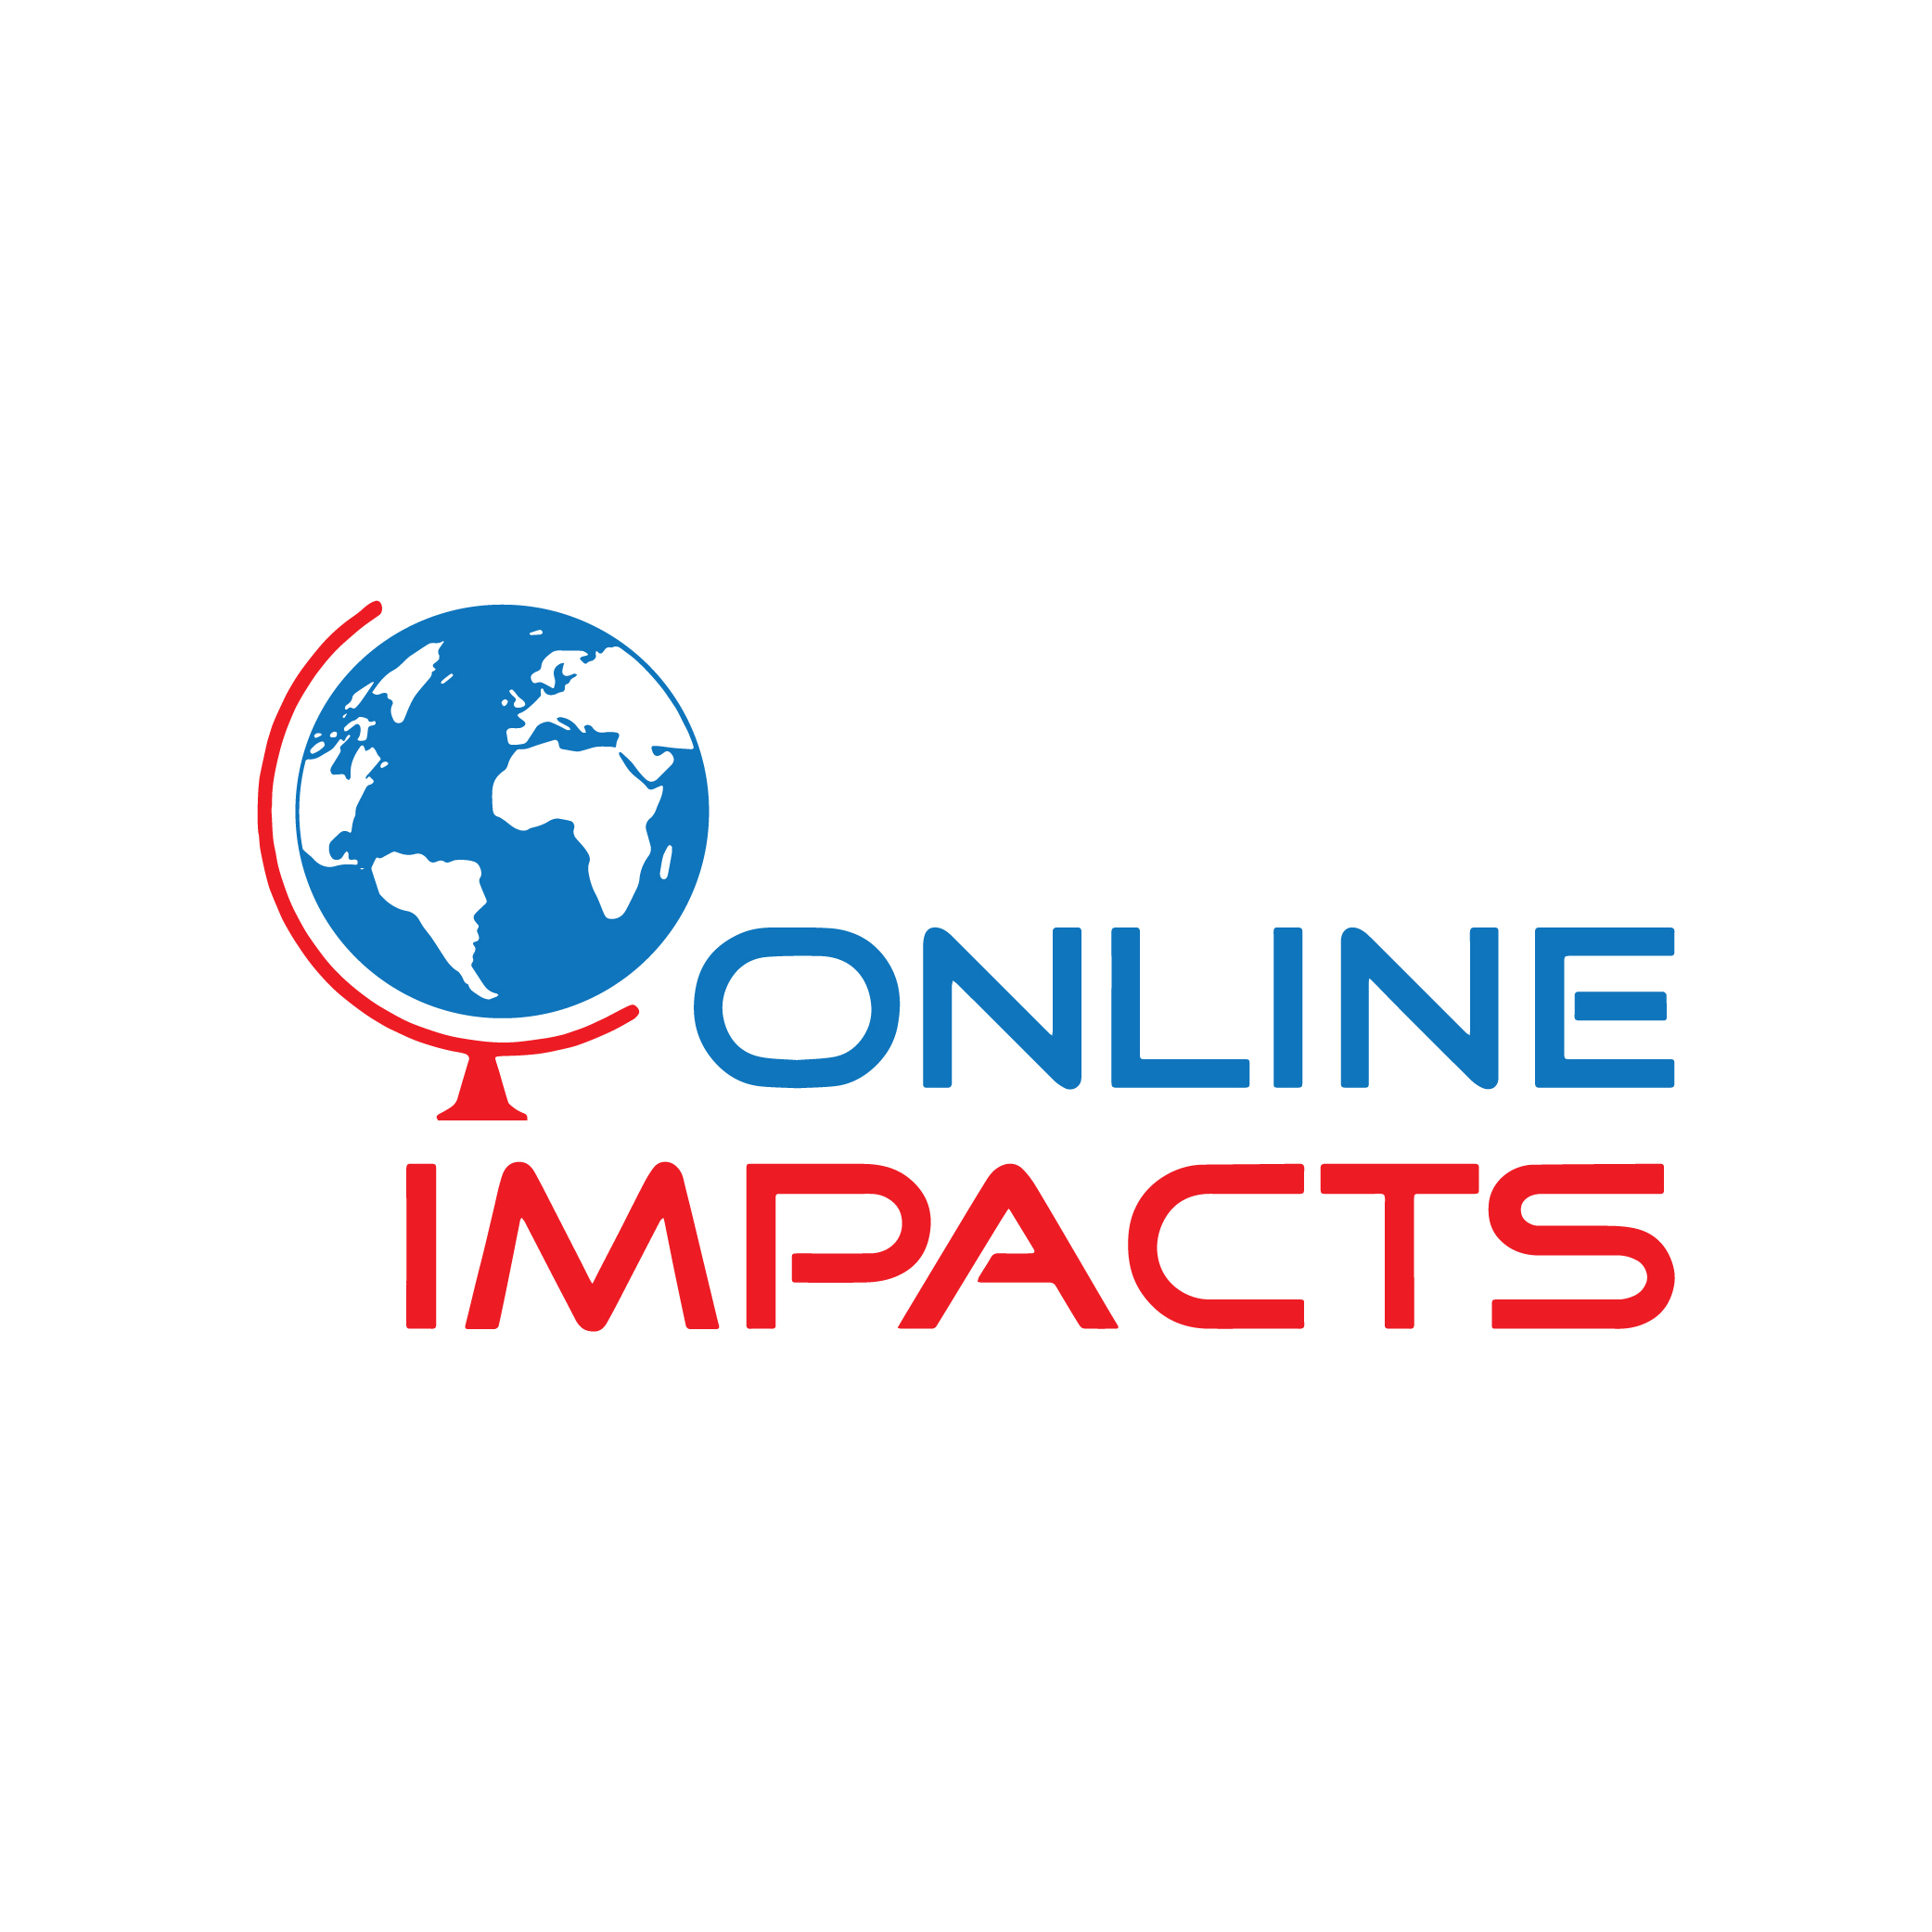 Online Impacts Sees reputation Rise After Offering Digital Marketing Services to Non-Profits For Free